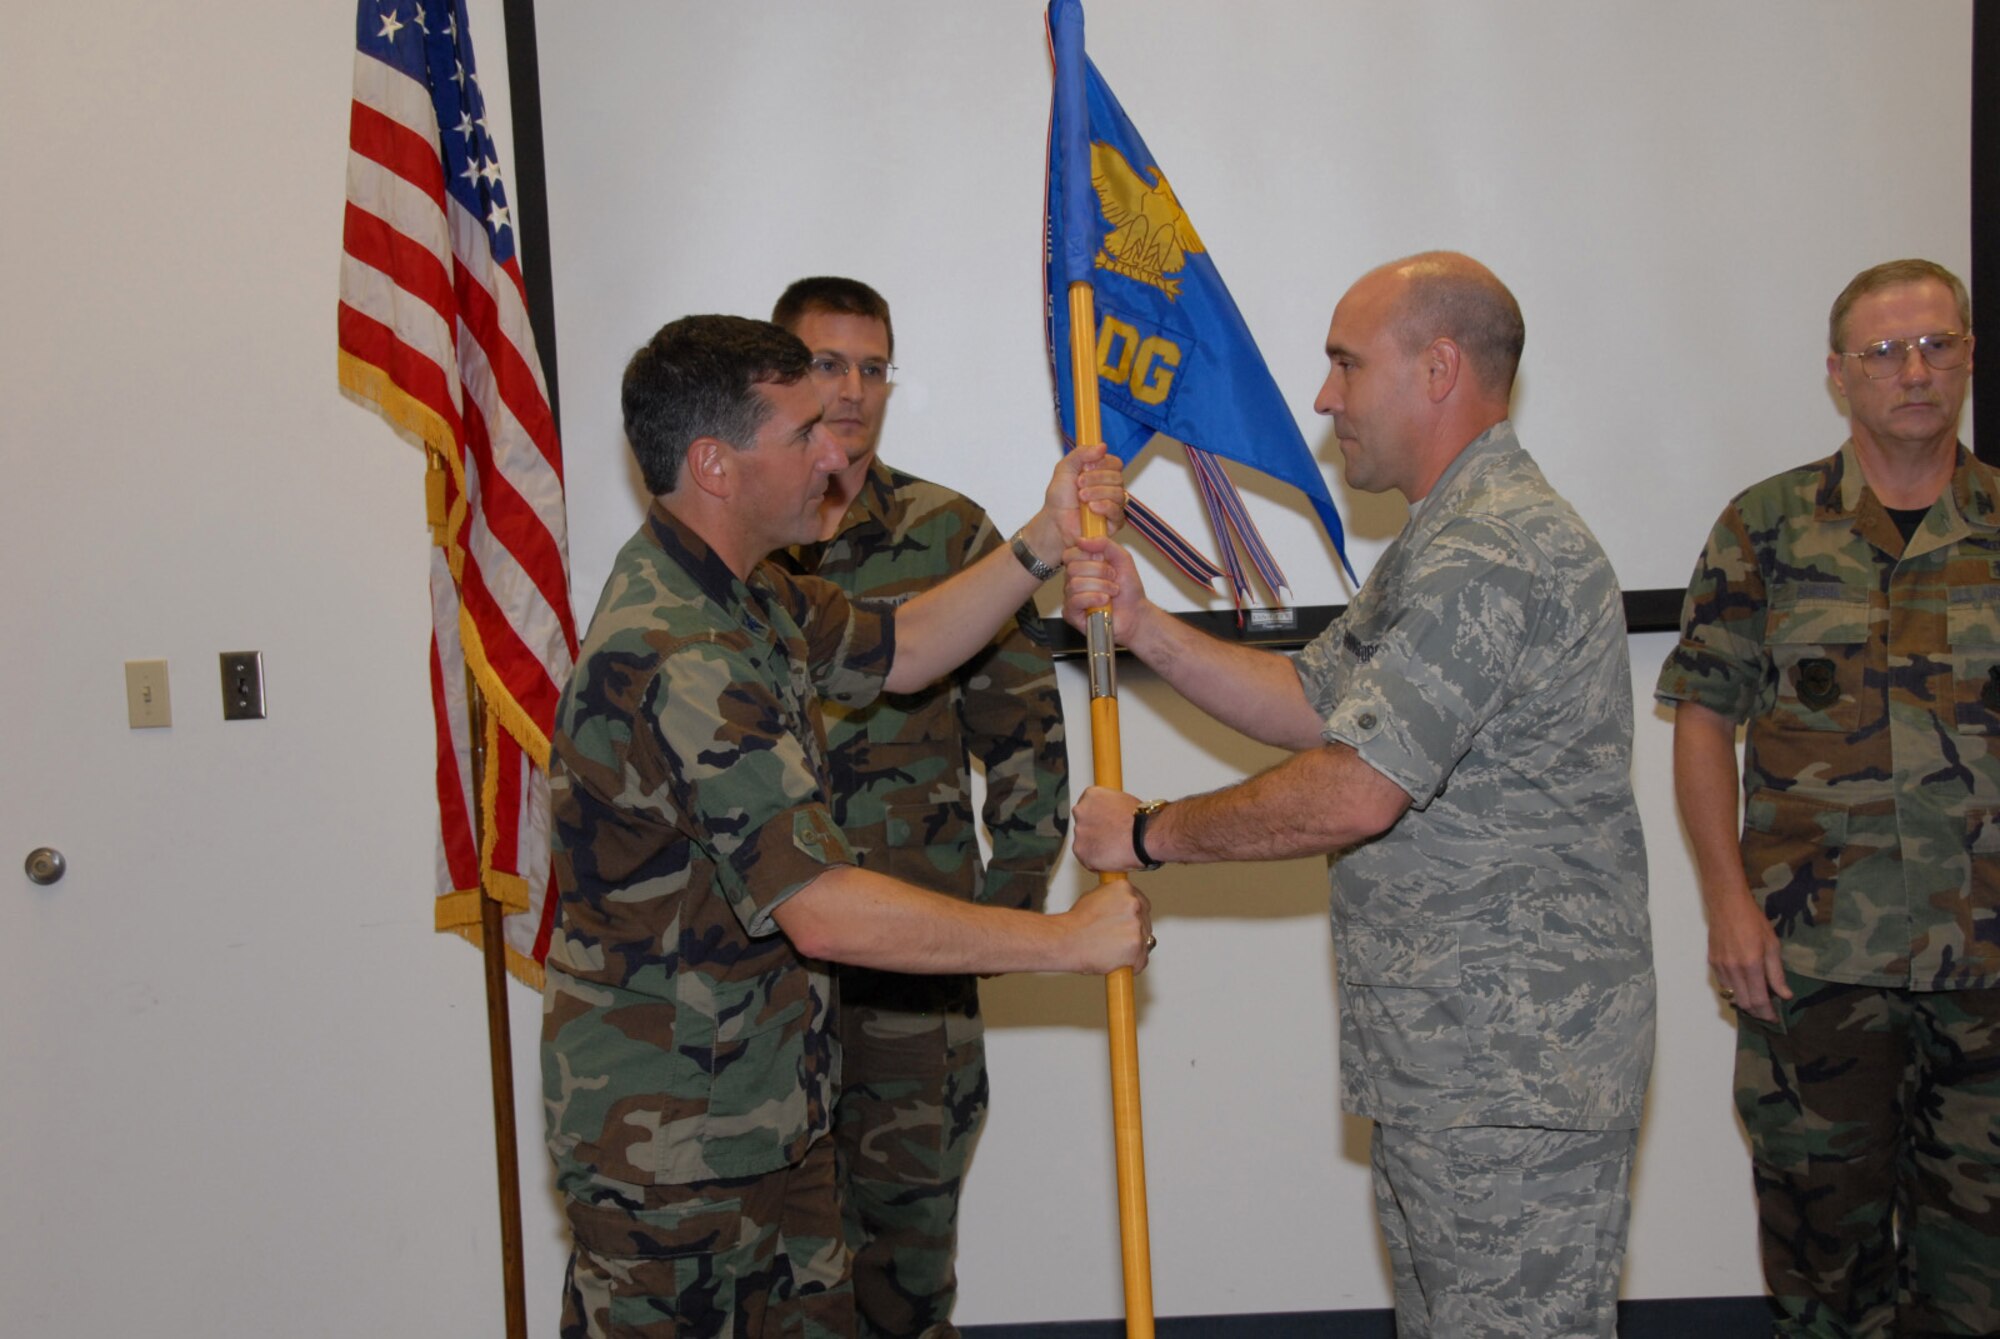 SCOTT AIR FORCE BASE, Ill. - Lt. Col. Jon Boehning accepts the guideon and command of the 126th Medical Group from Col Peter Nezamis, commander of the 126th Air Refueling Wing, as Master Sgt. Mark Teigland, the 126 MDG first sergeant looks on.  (U.S. Air Force photo by Tech. Sgt. Mike Rice)